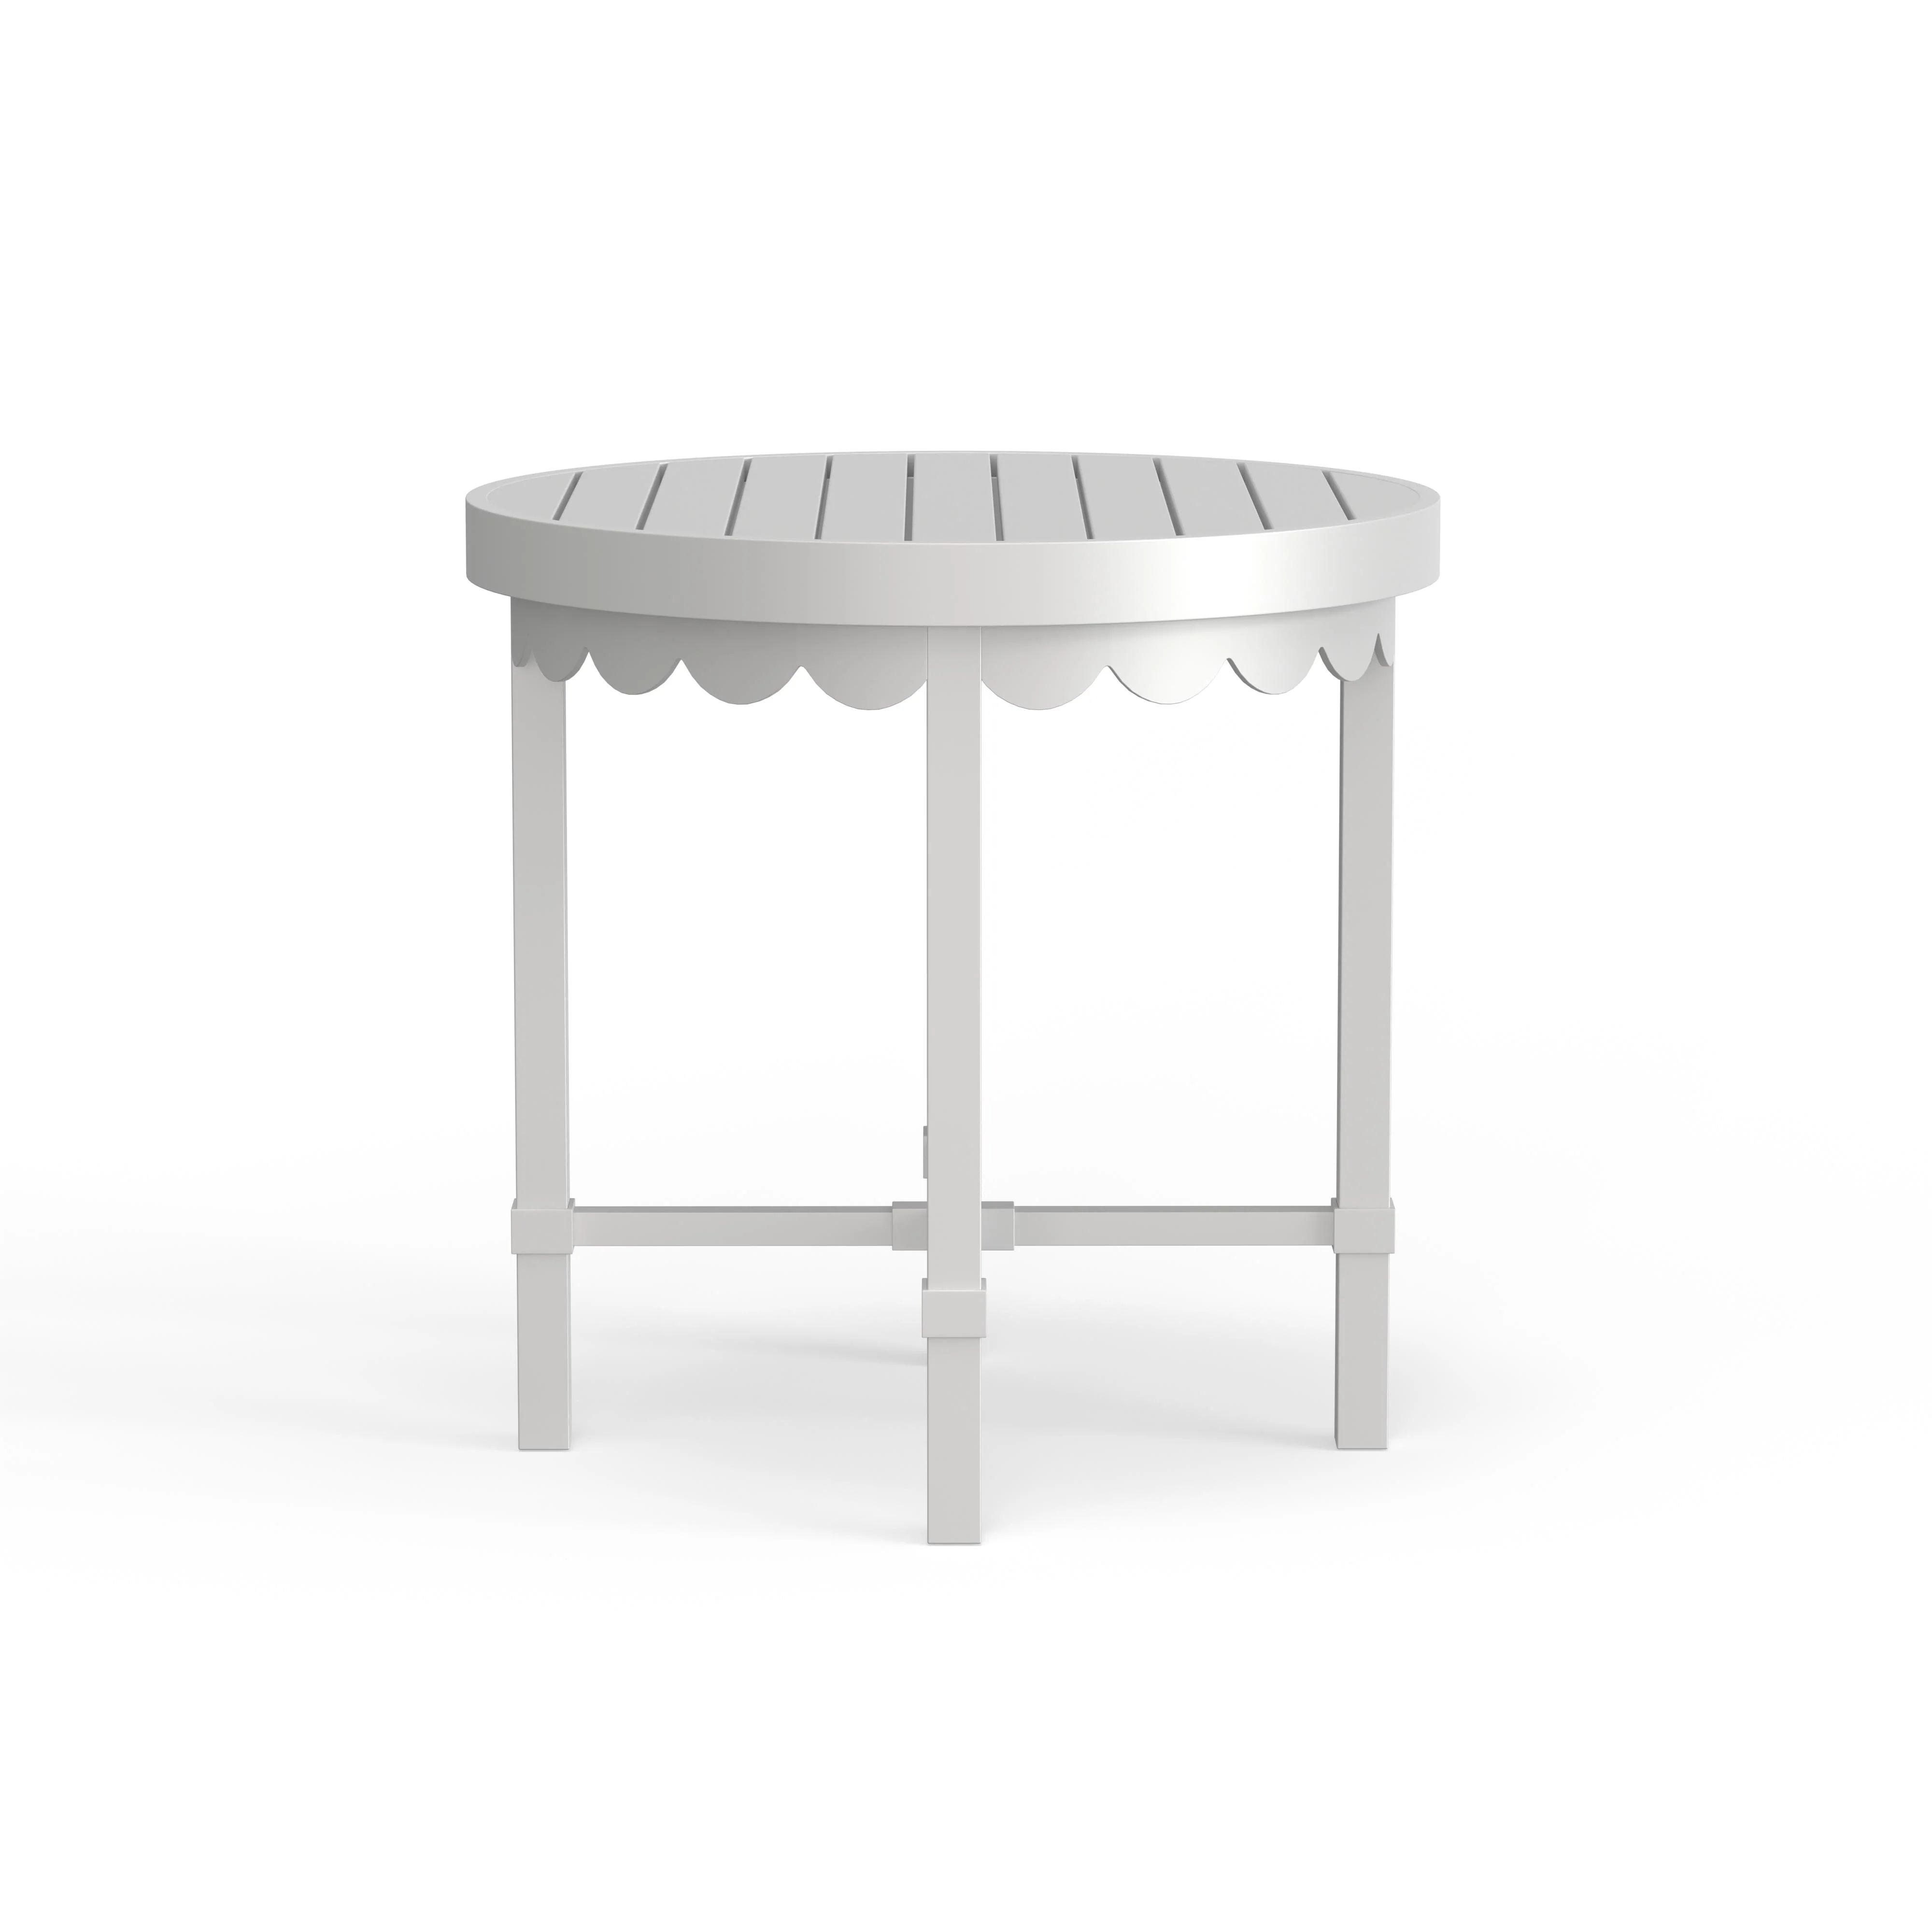 Early Access: Riviera Side Table in Alabaster | Brooke and Lou